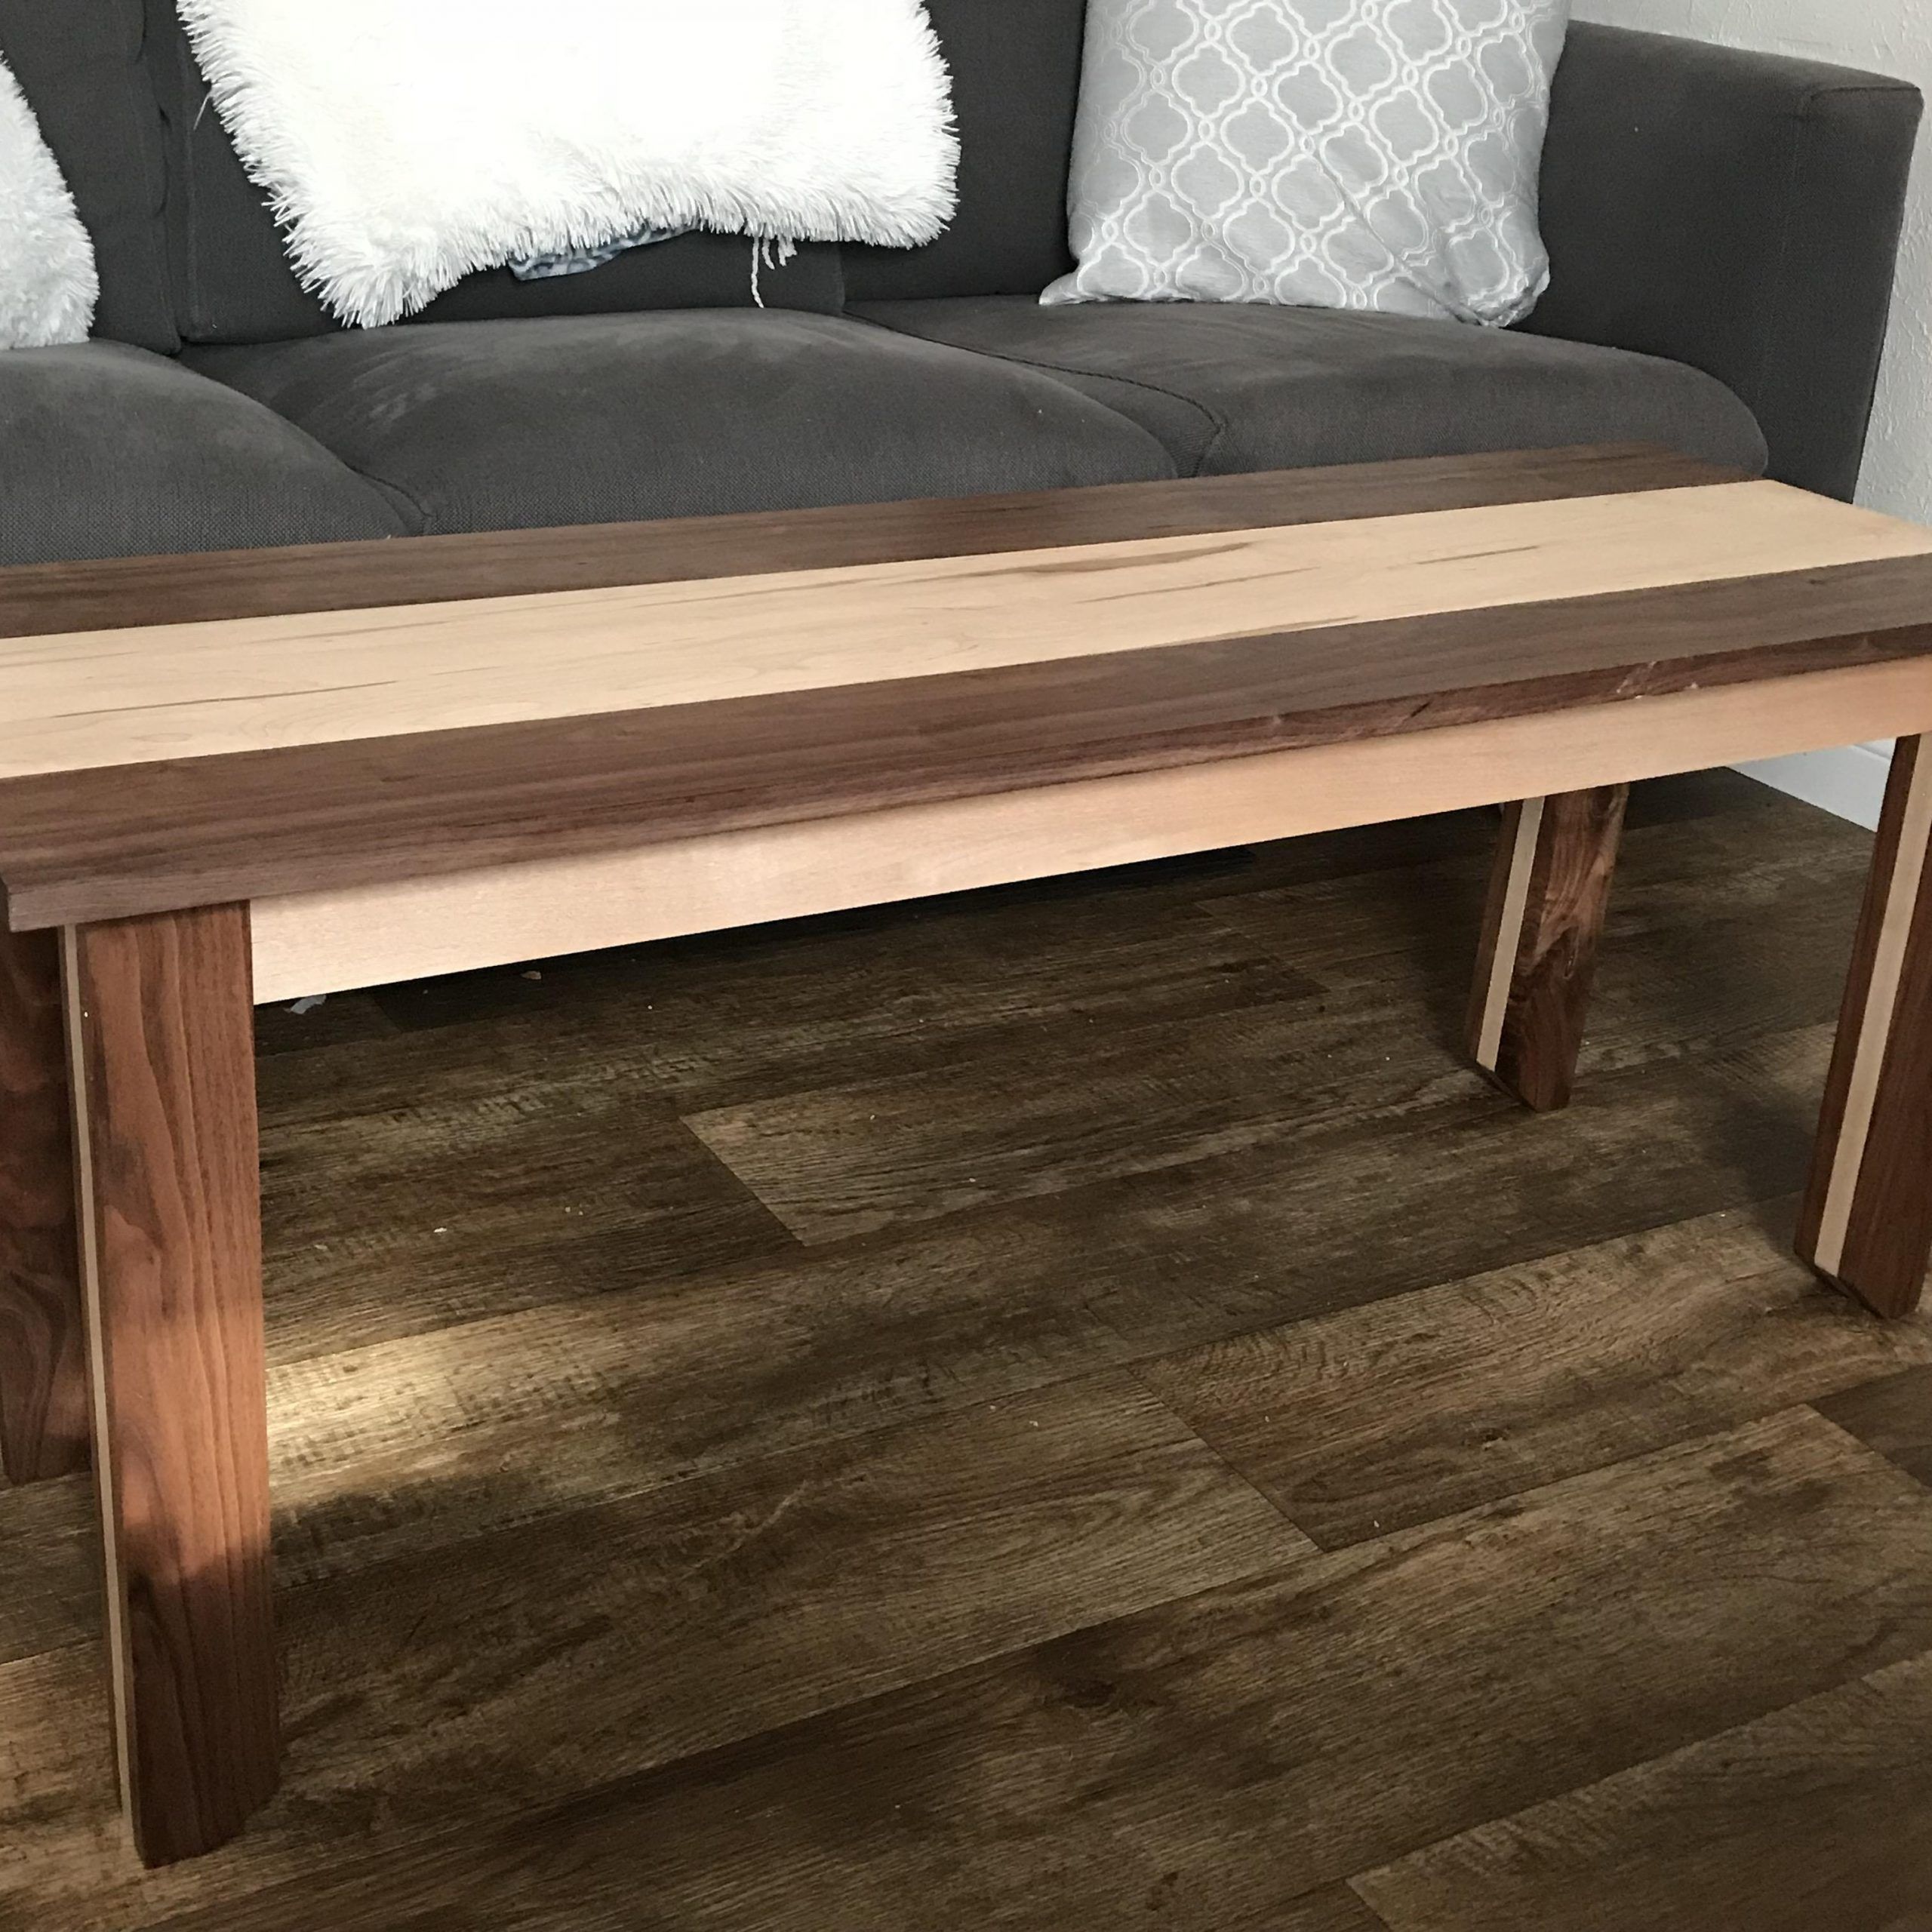 Most Popular Hand Finished Walnut Coffee Tables Throughout Walnut And Maple Coffee Table I Just Finished Up : Woodworking (View 7 of 10)